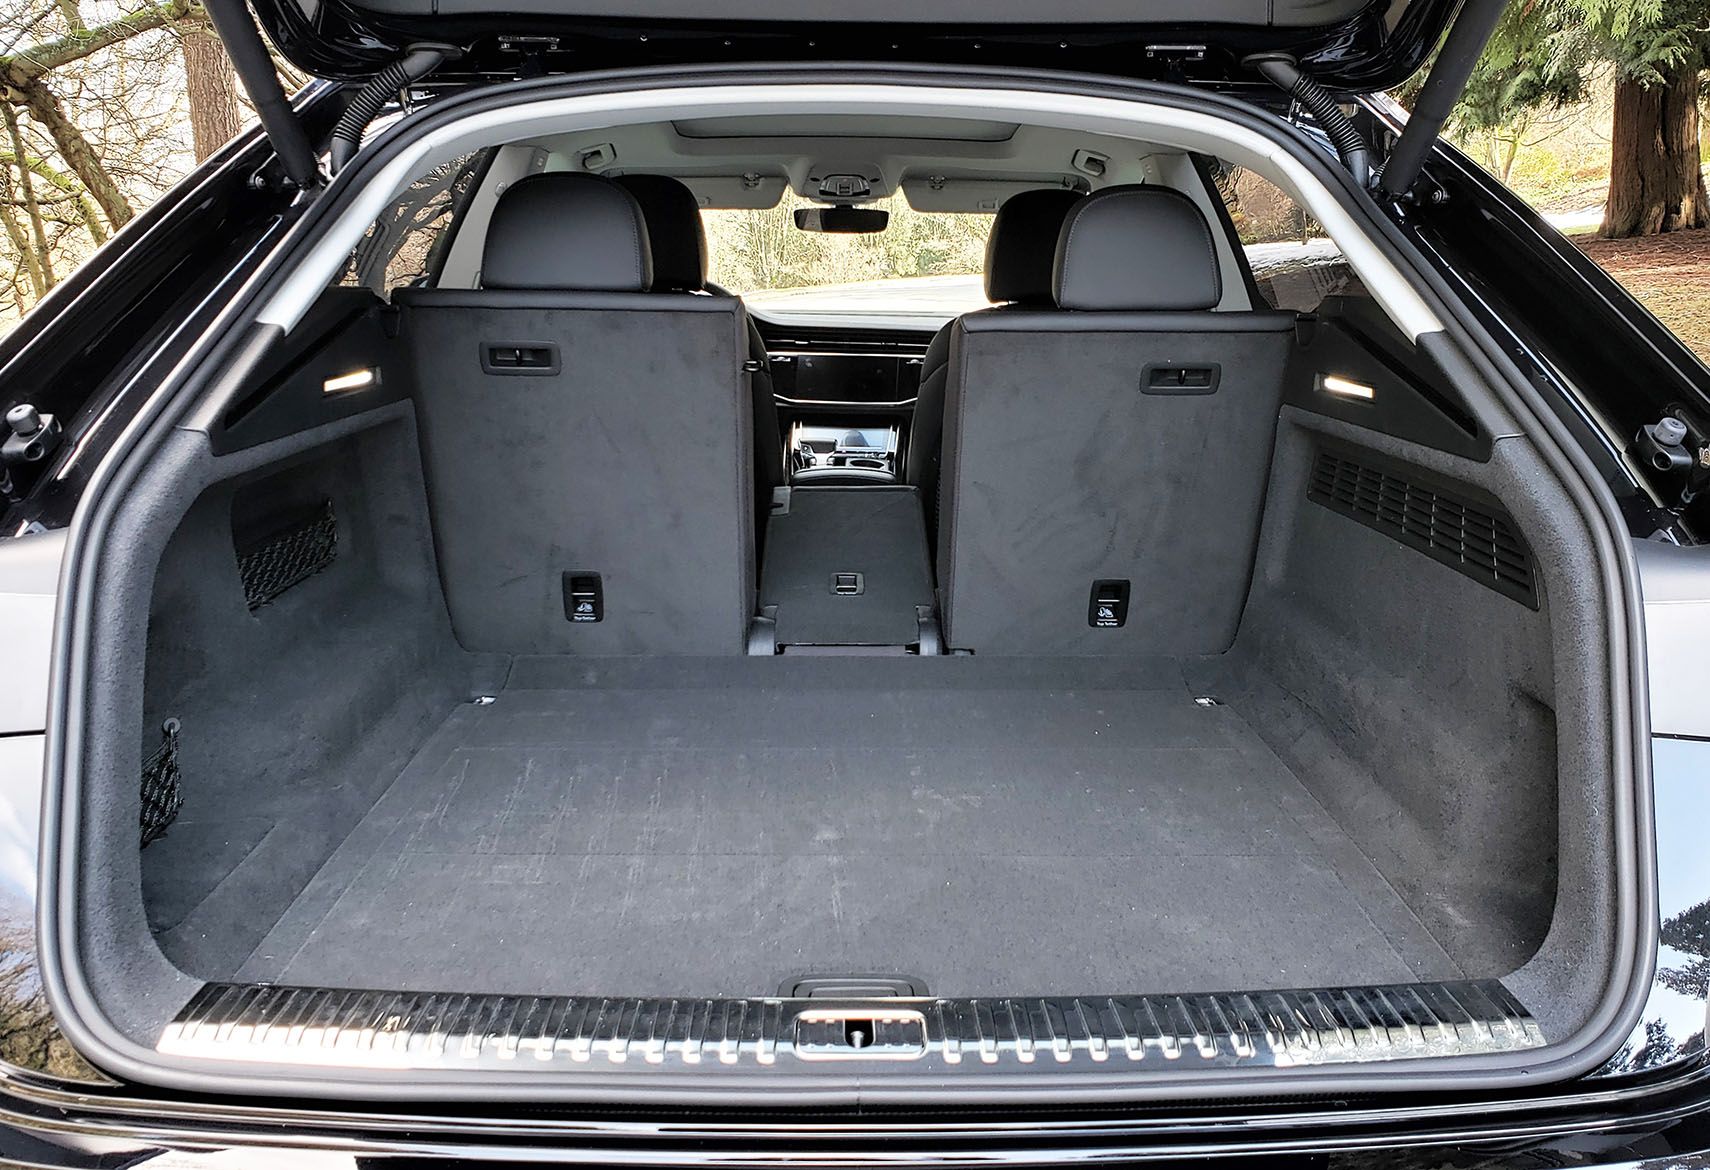 Hauling cargo is no problem, much thanks to the Q8's flexible 40/20/40-split rear seats.